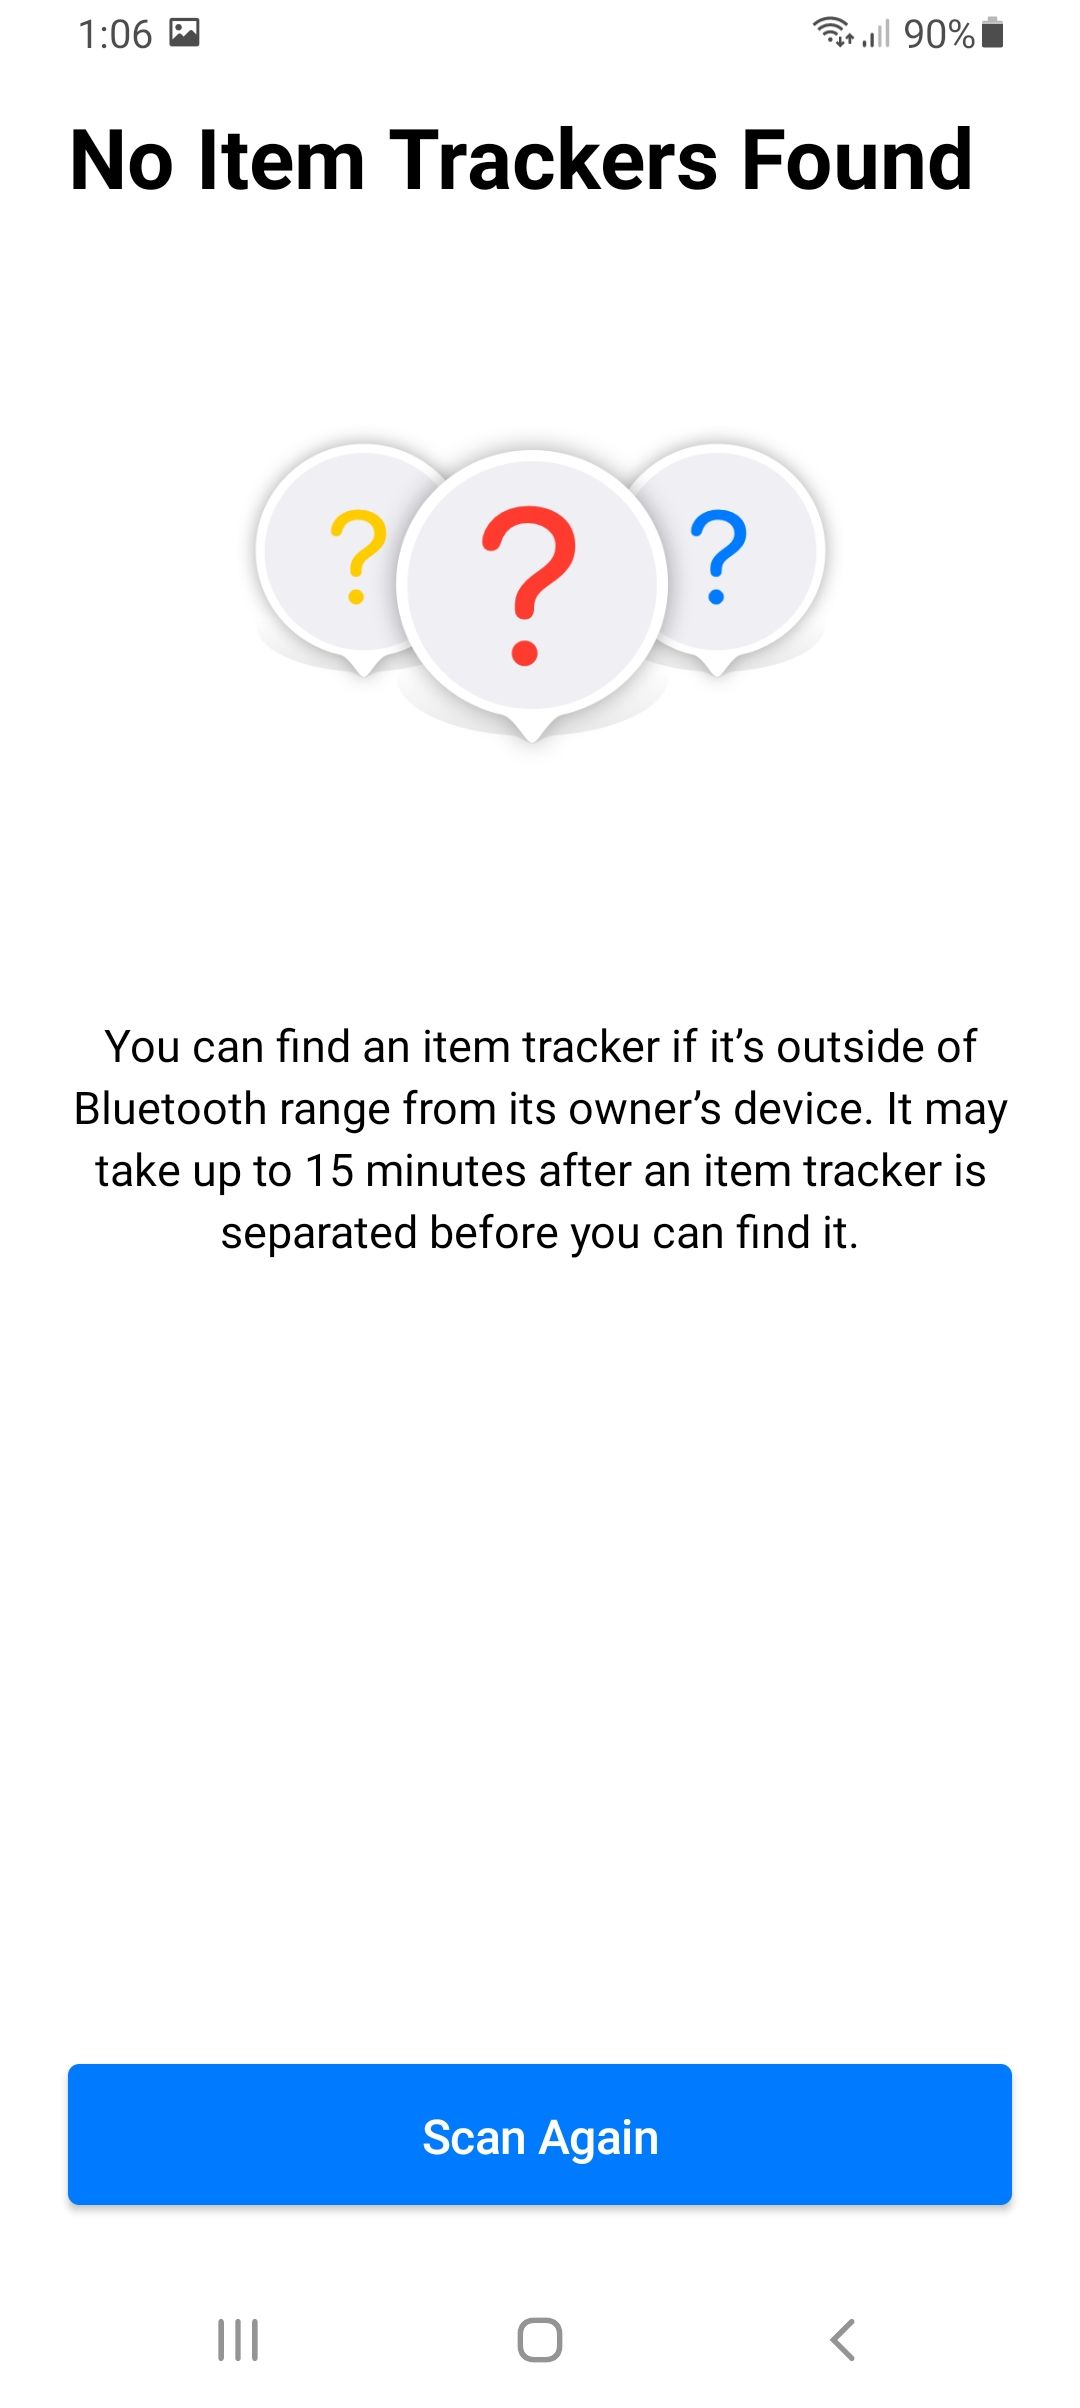 Tracker Detect post scan with on-screen information and Scan Again button.